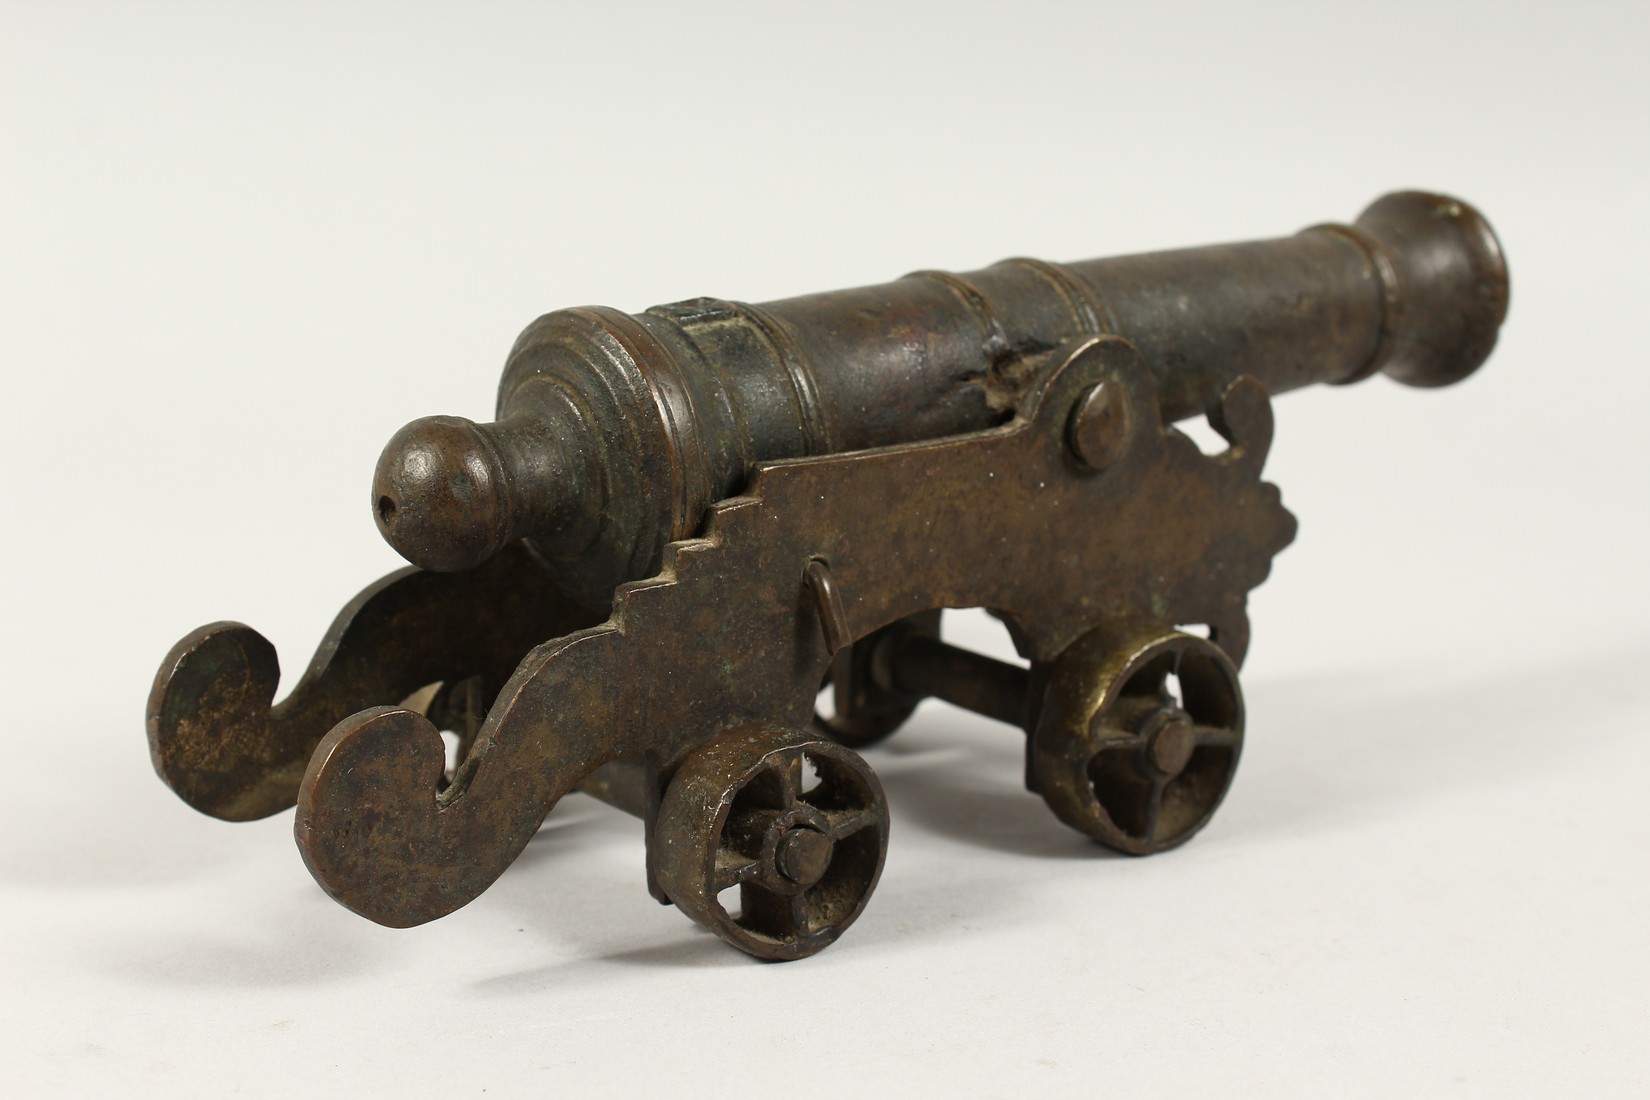 A SMALL EARLY BRONZE STARTER CANNON on bronze stand. 10ins long. - Image 2 of 2